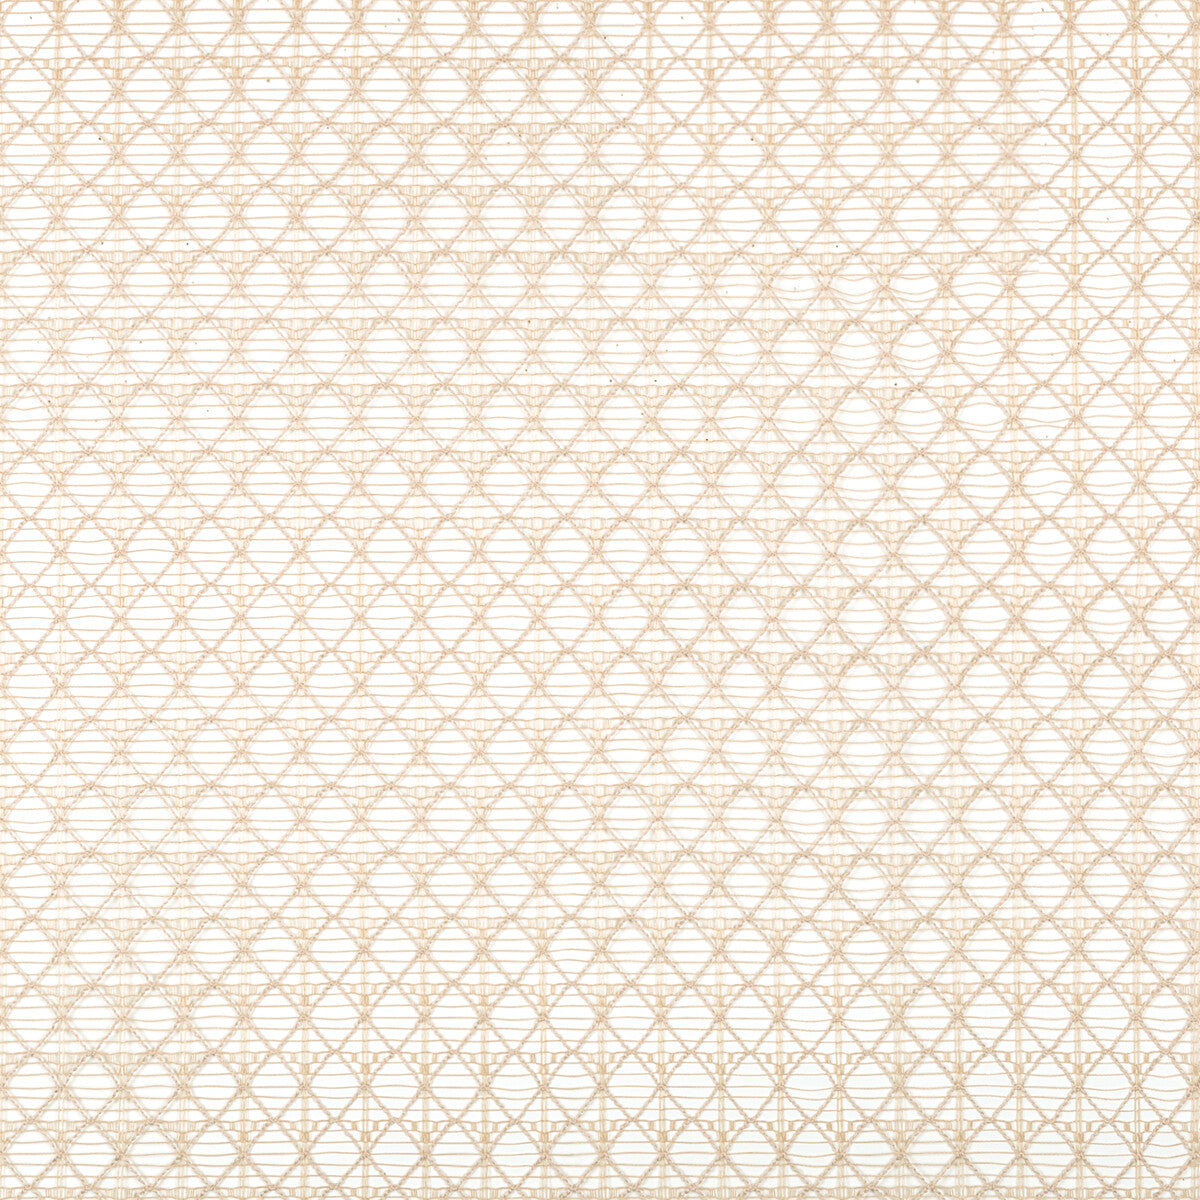 Intersecting fabric in flax color - pattern 4824.116.0 - by Kravet Contract